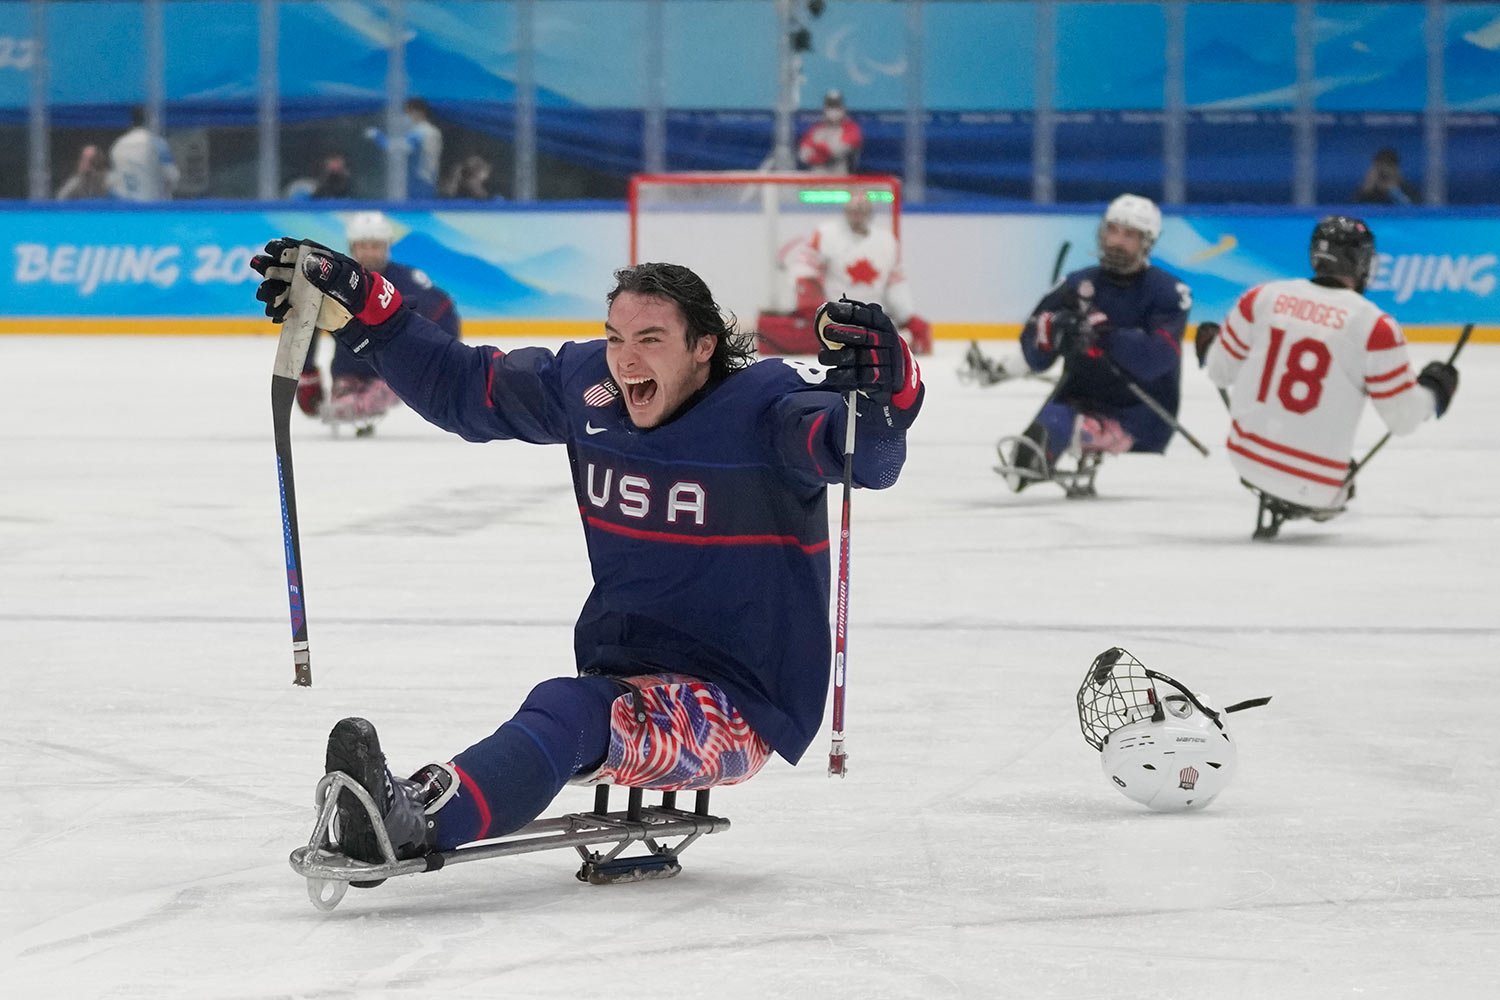  Jack Wallace of the United States celebrates after his team defeated Canada in their para ice hockey gold medal match at the 2022 Winter Paralympics, Sunday, March 13, 2022, in Beijing. (AP Photo/Dita Alangkara) 